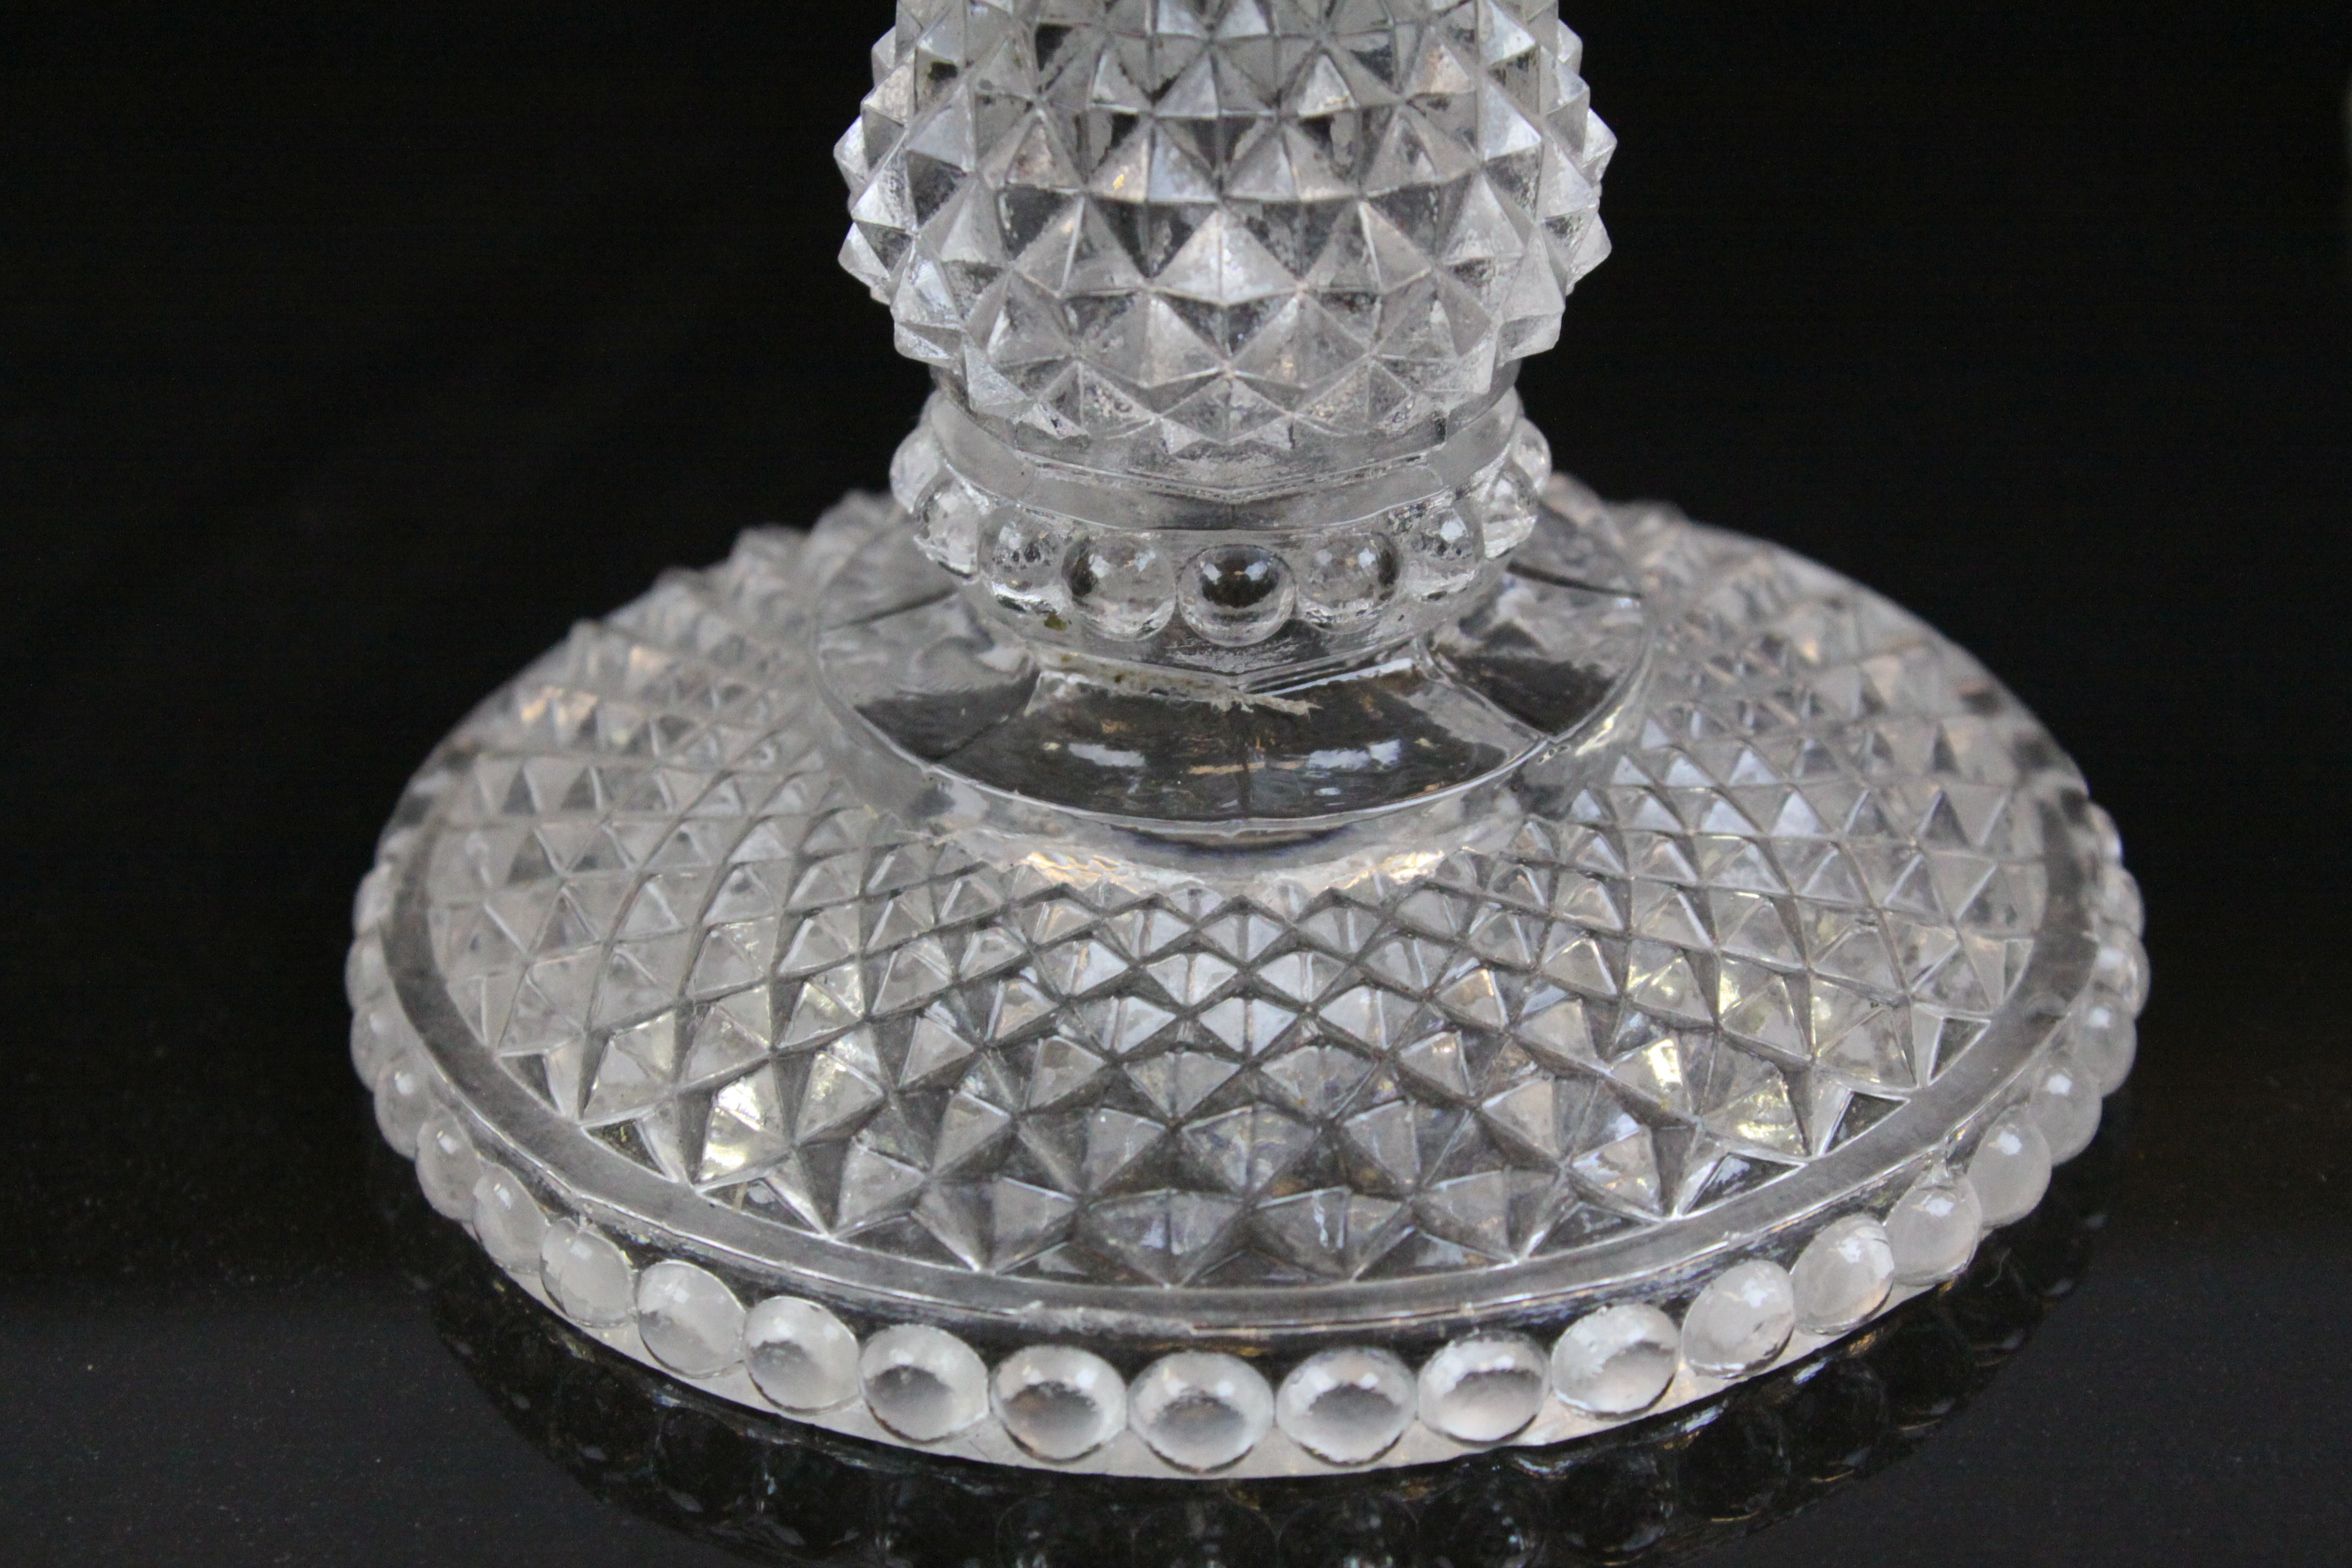 Pair of Baccarat Hobnail Glass Candlesticks, 18cms high - Image 5 of 6